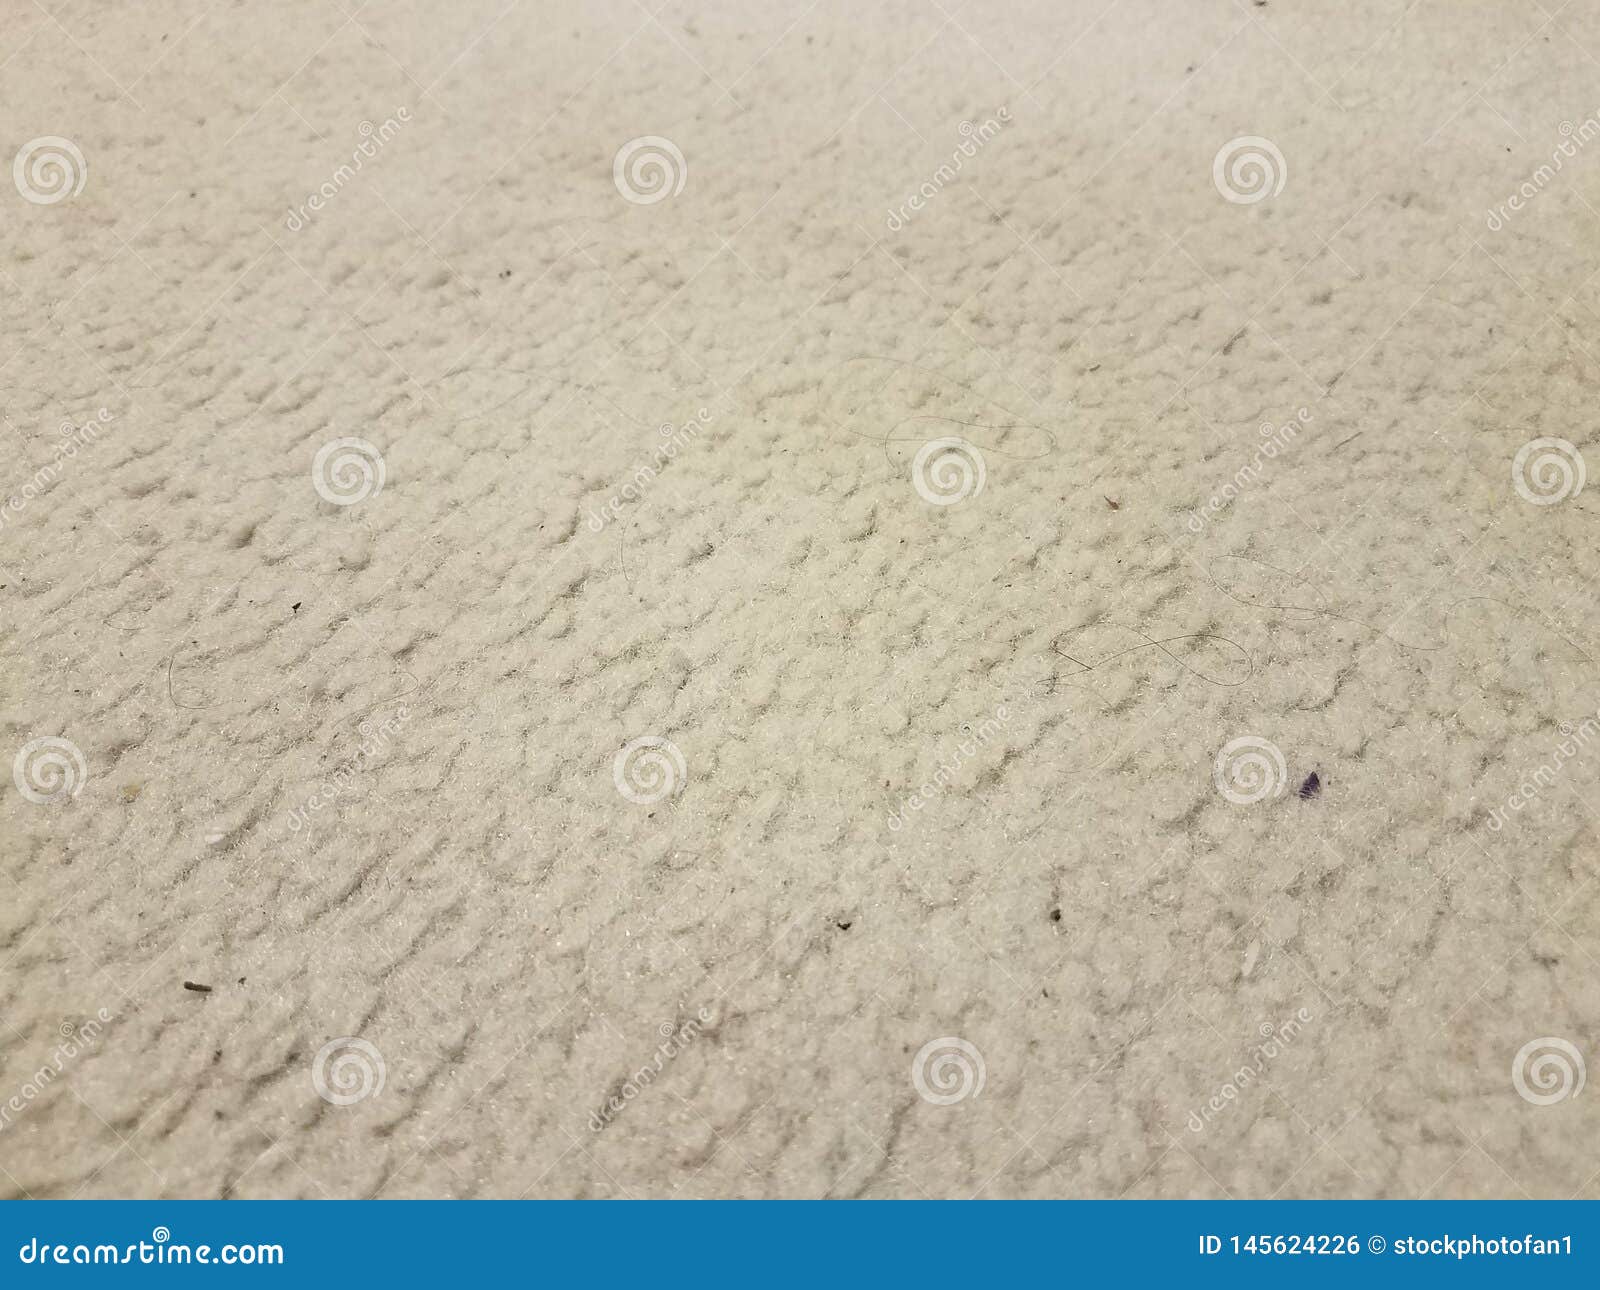 Dirty White Or Grey Carpet Or Rug With Hairs Stock Photo Image of fibers, carpet 145624226